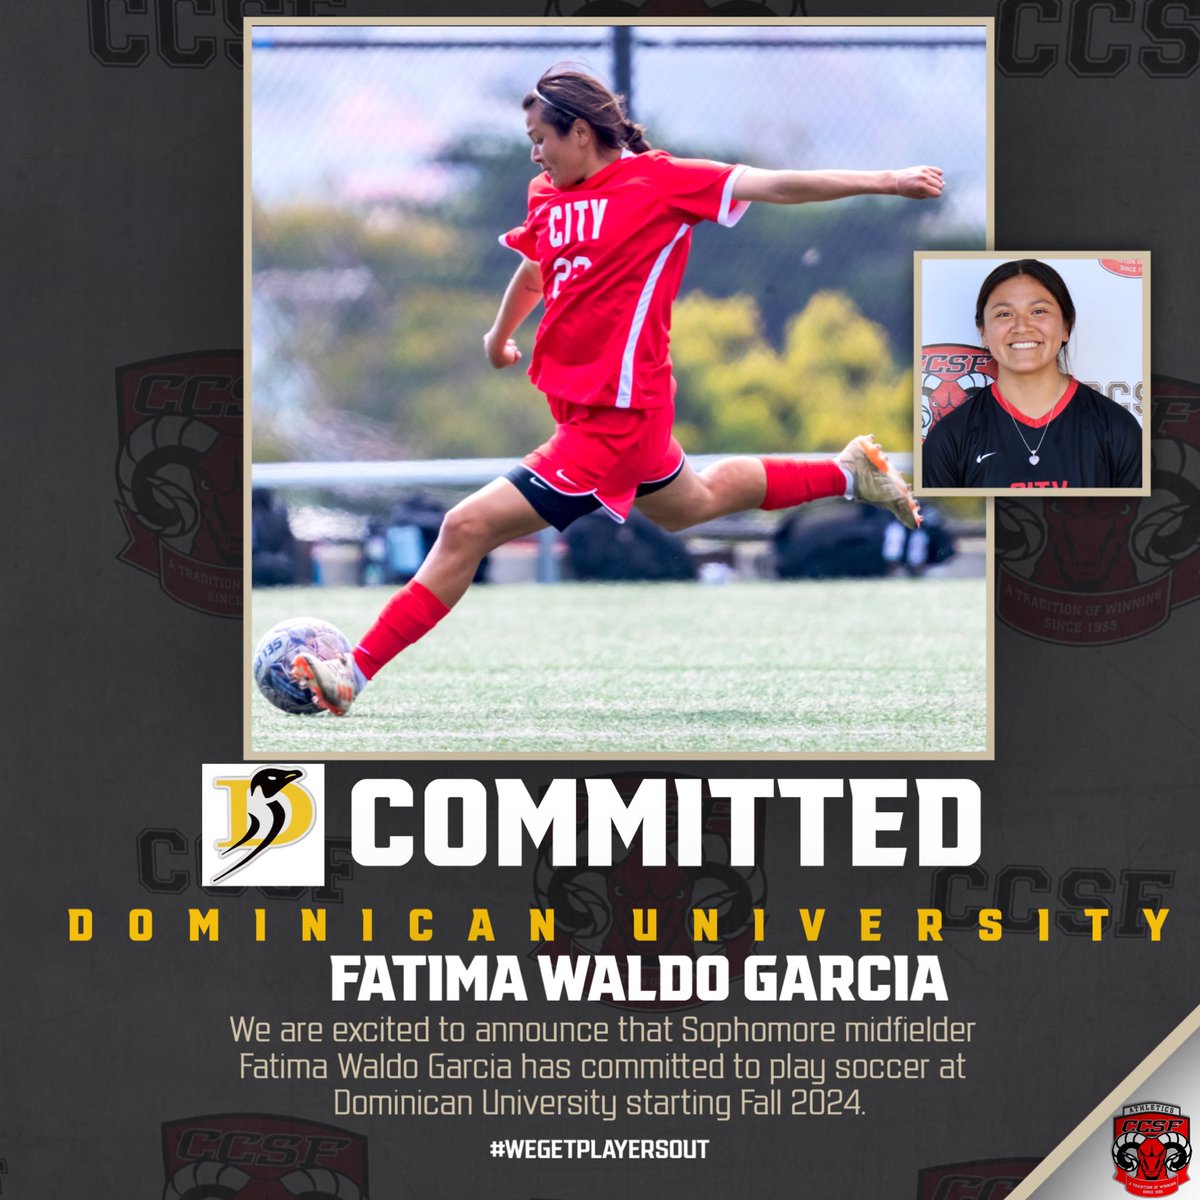 “Coming to City has been one of the best experiences I have ever had. I’ve enjoyed being apart of a great program and amazing coaches. I’m super grateful to have been able to meet wonderful and talented teammates. I’m excited to watch this program continue to grow.” Thx Fatima